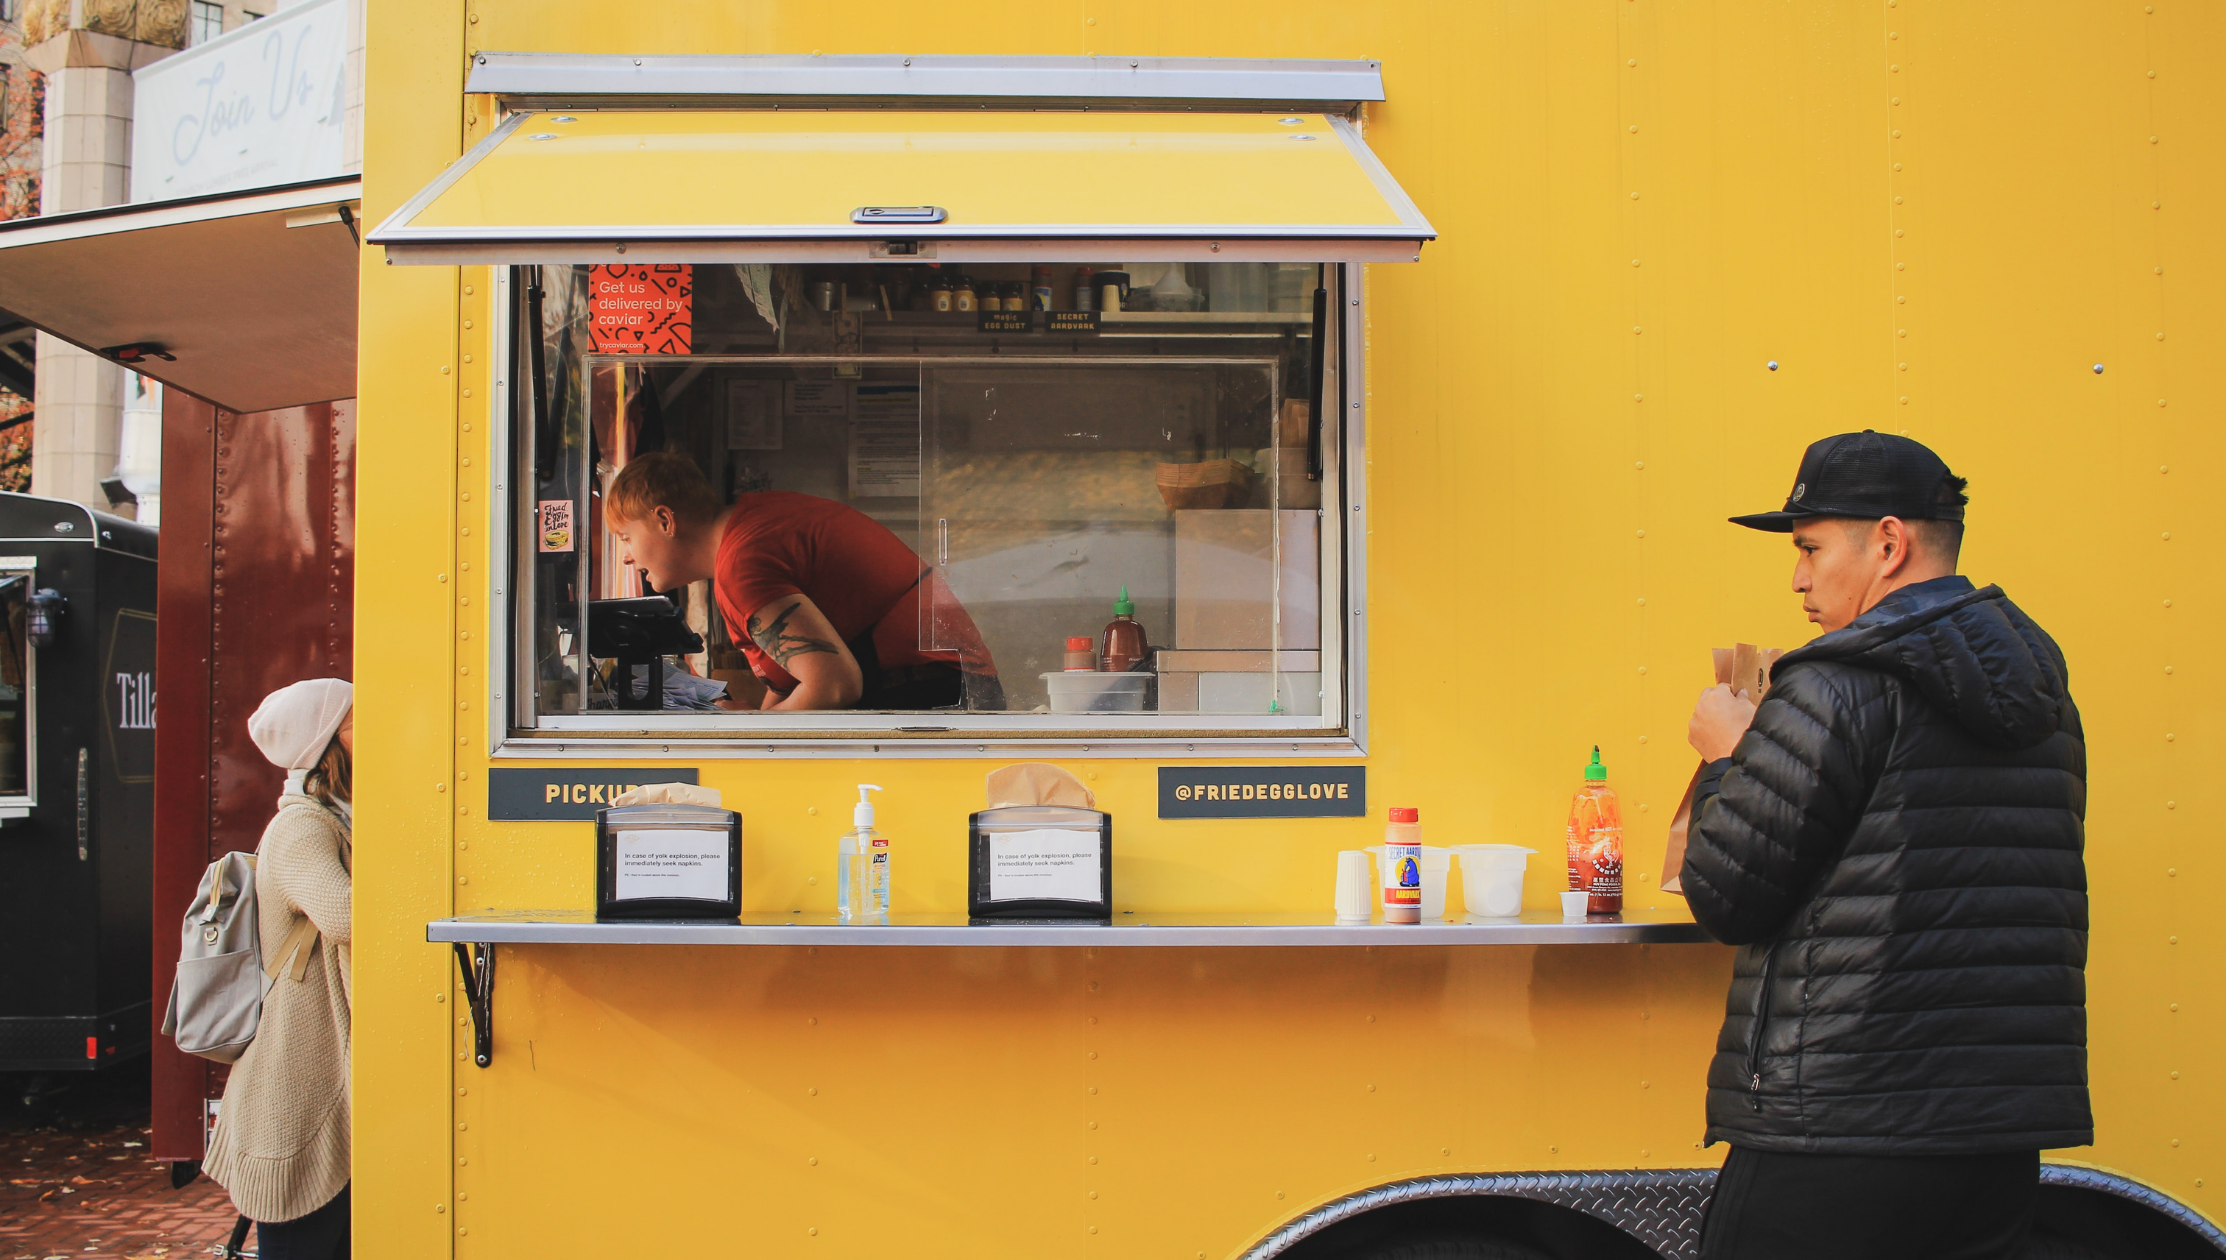 A customer in a black jacket and hat outside a yellow food truck